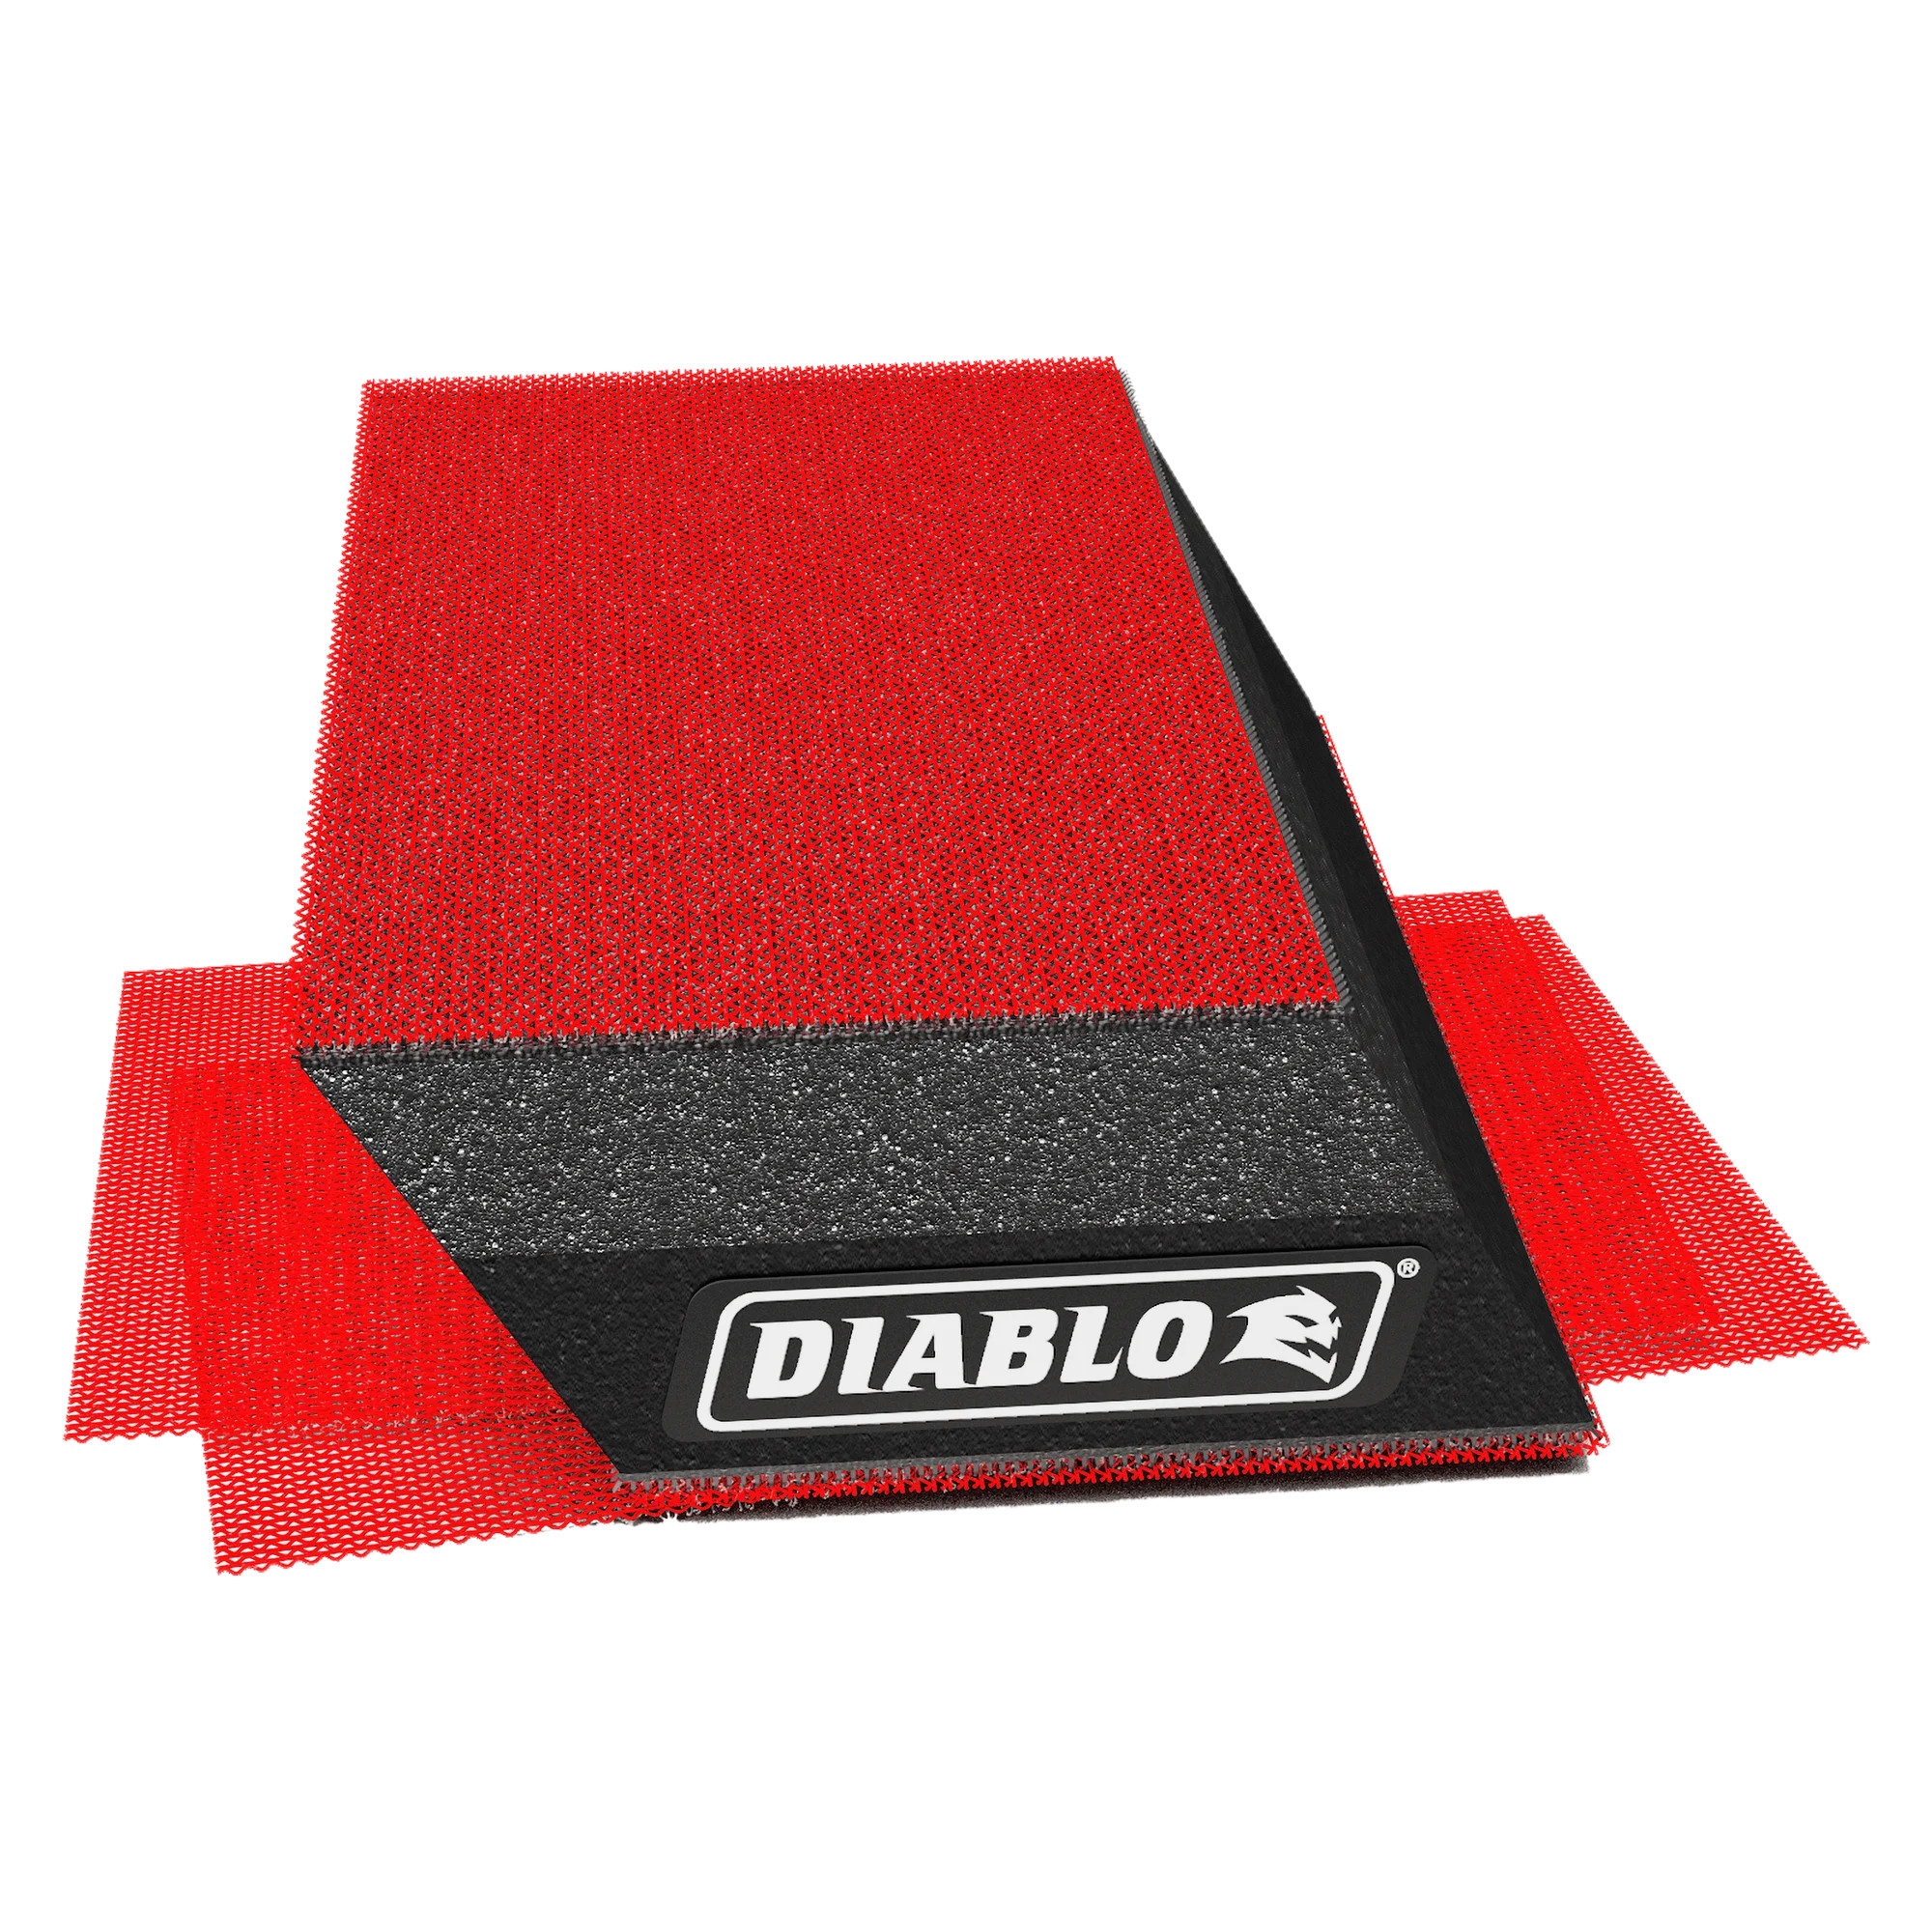 Diablo DFB234ANGH01G 5 in. x 2-3/4 in. Reusable Angled Hand Sanding Block